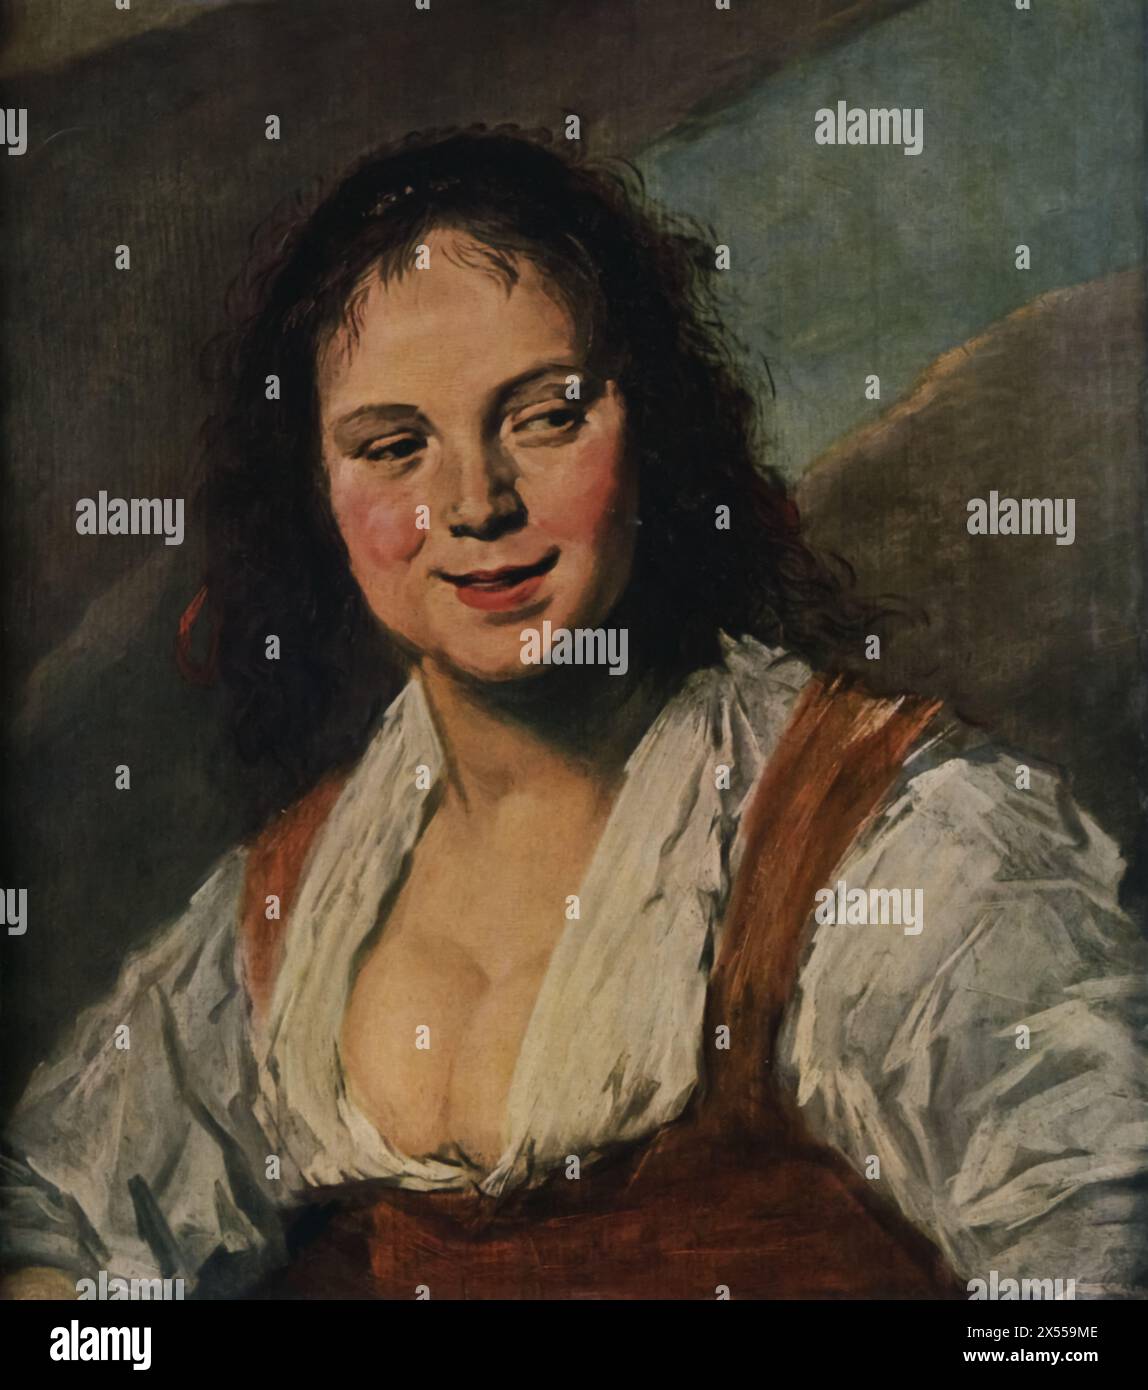 La Bohémienne' ('The Gypsy Girl') by Frans Hals, dated circa 1625, housed at the Louvre Museum, Paris, France. This portrait by Frans Hals captures the lively expression and spirited demeanor of a young gypsy woman. Hals’s ability to portray figures with a sense of life and character, makes this work a typical example of 17th-century Dutch portraiture. Stock Photo